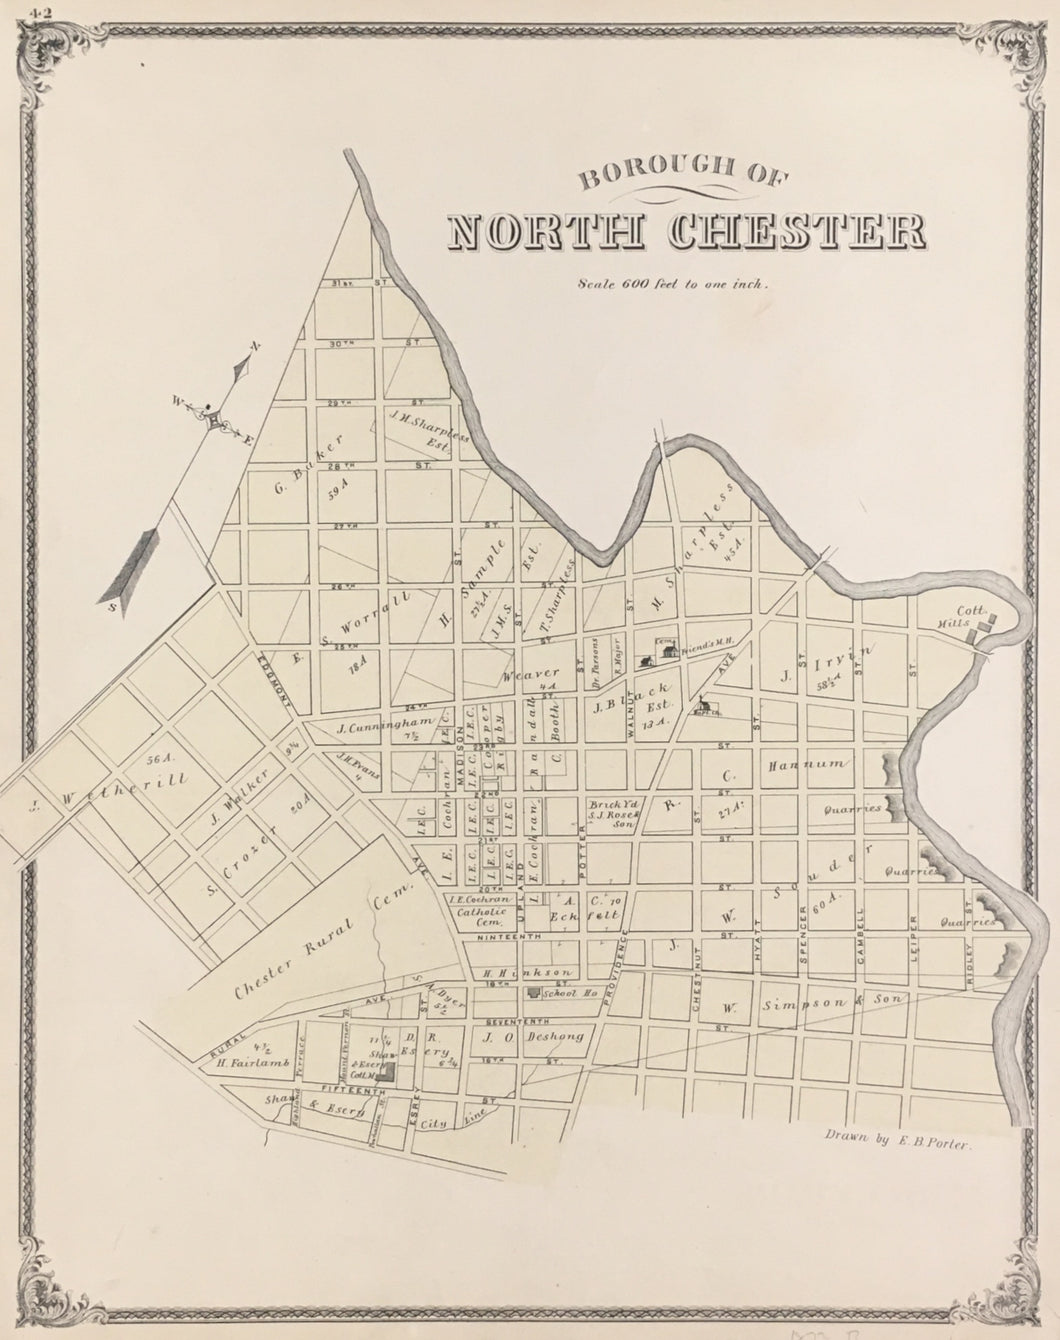 Everts & Stewart  “Borough of North Chester”